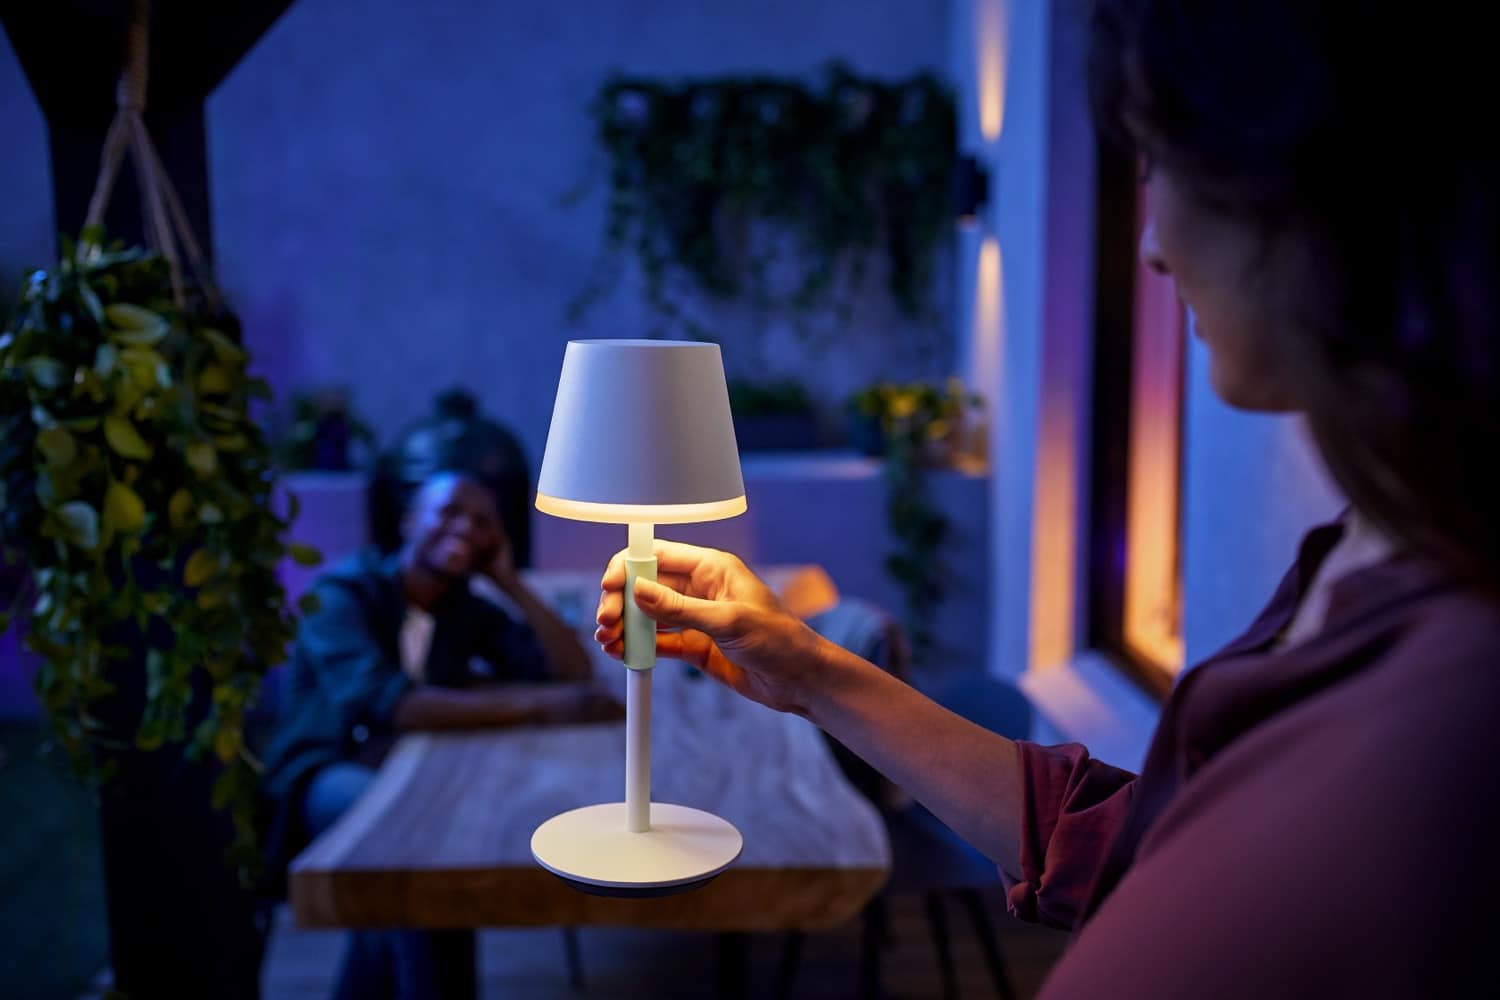 Philips Hue comes out with an almost priceless table lamp